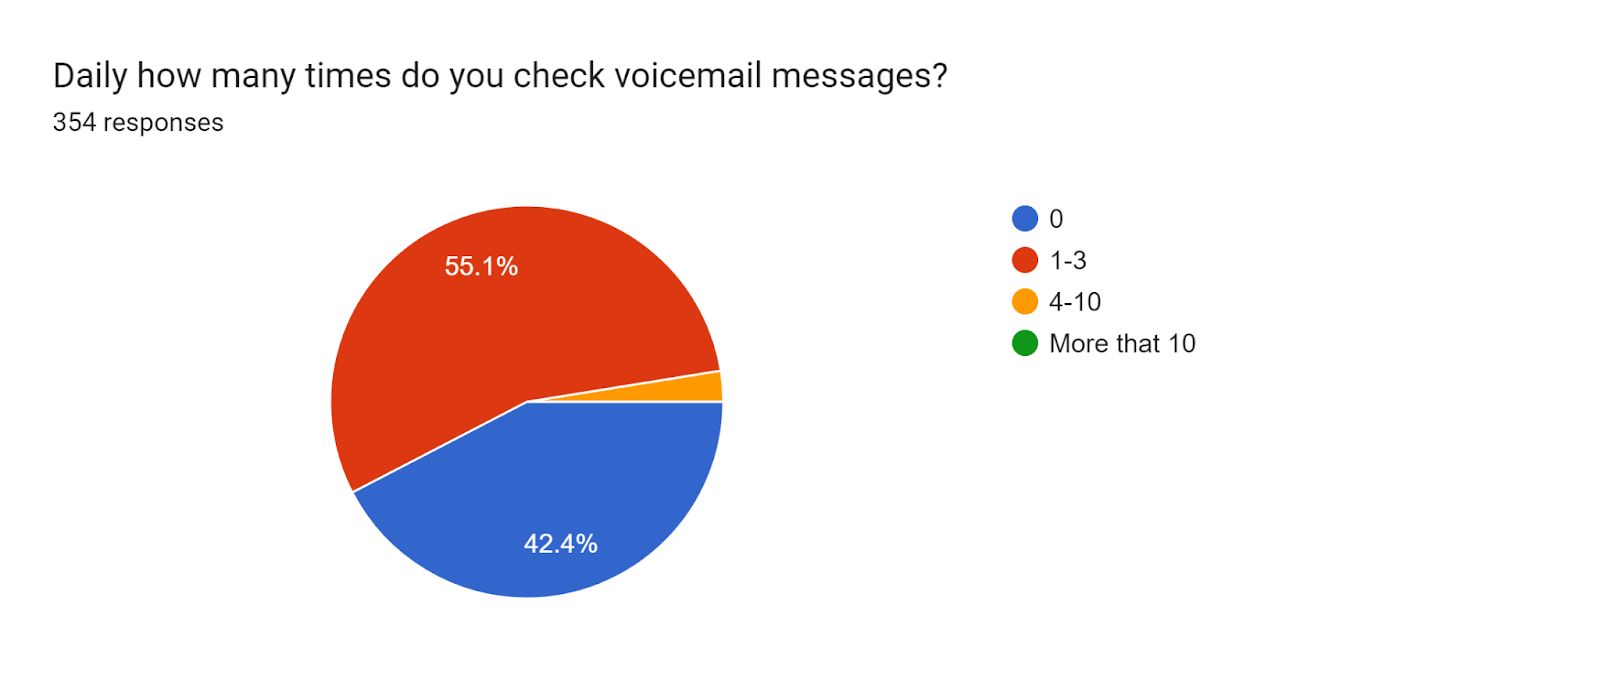 Forms response chart. Question title: Daily how many times do you check voicemail messages?
. Number of responses: 354 responses.